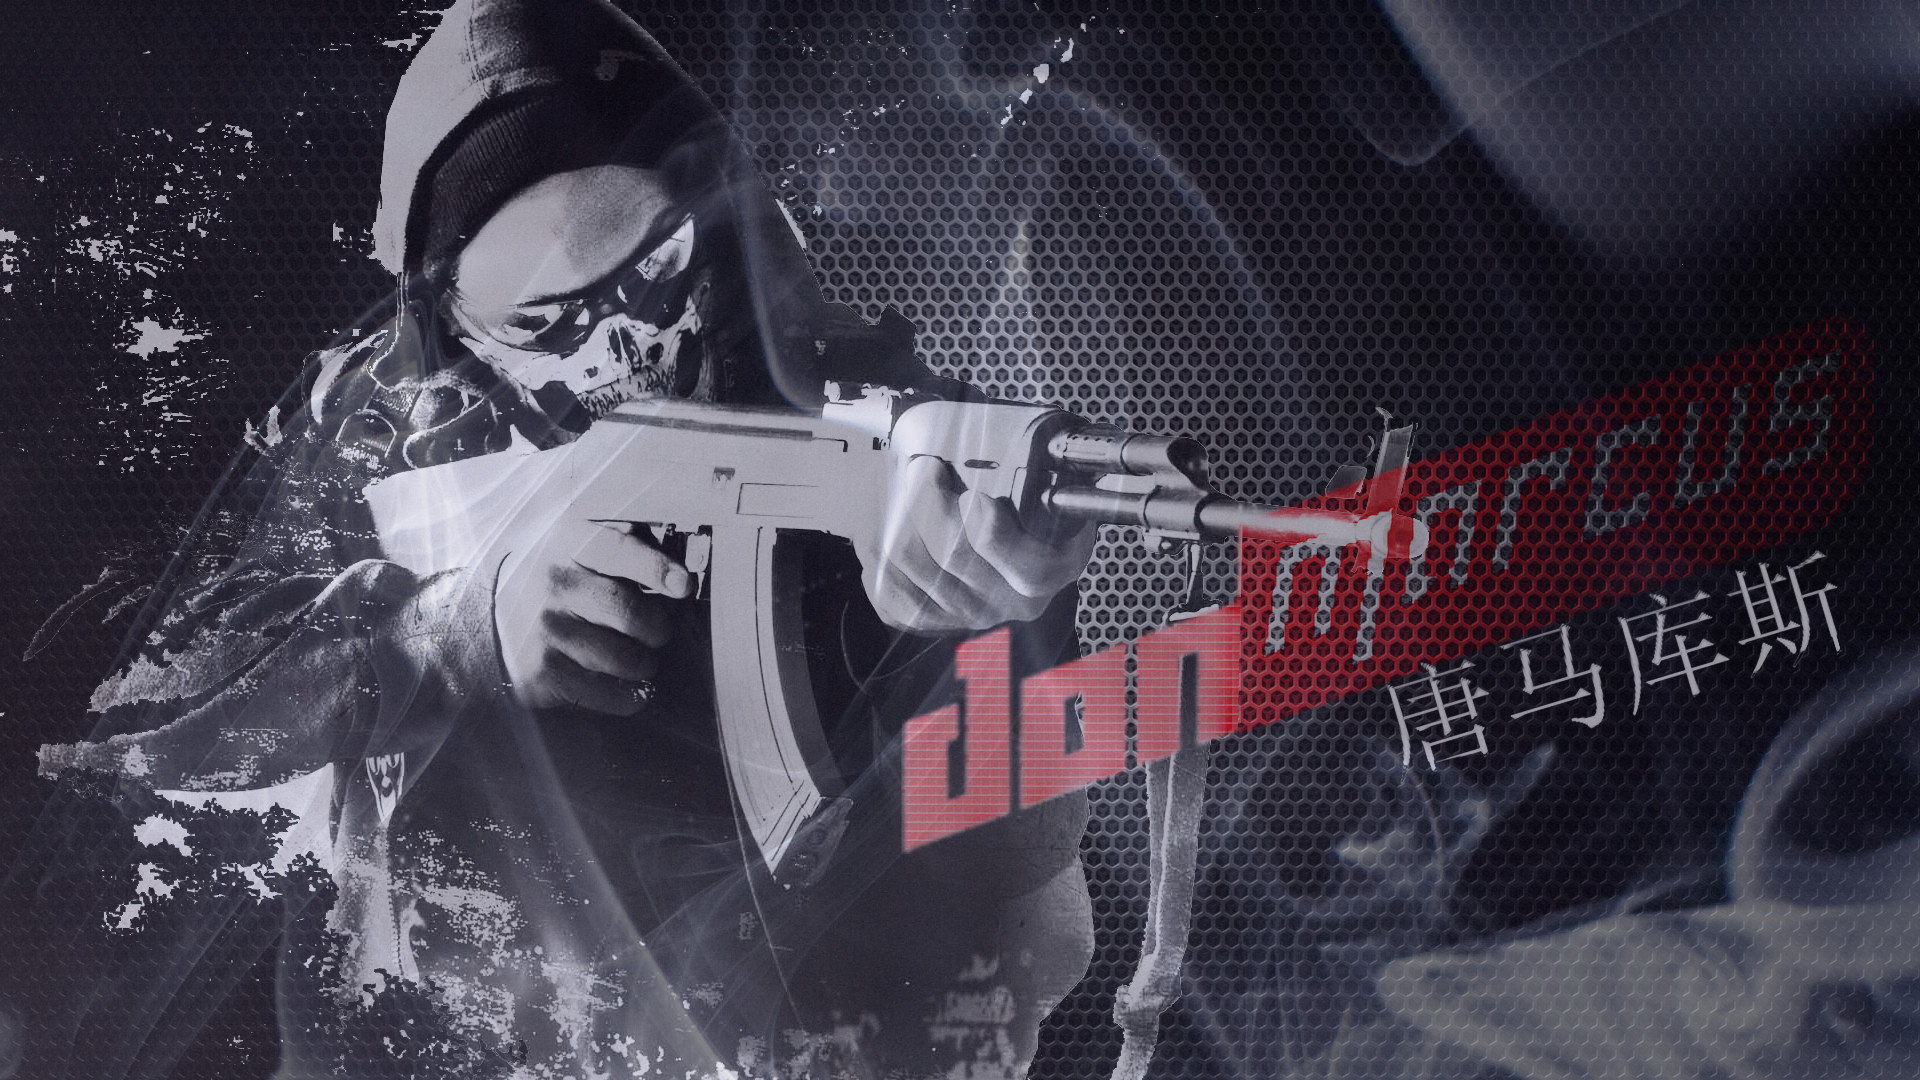 1920x1080 ... DonMarcus CS:GO Wallpaper  by Donnesmarcus